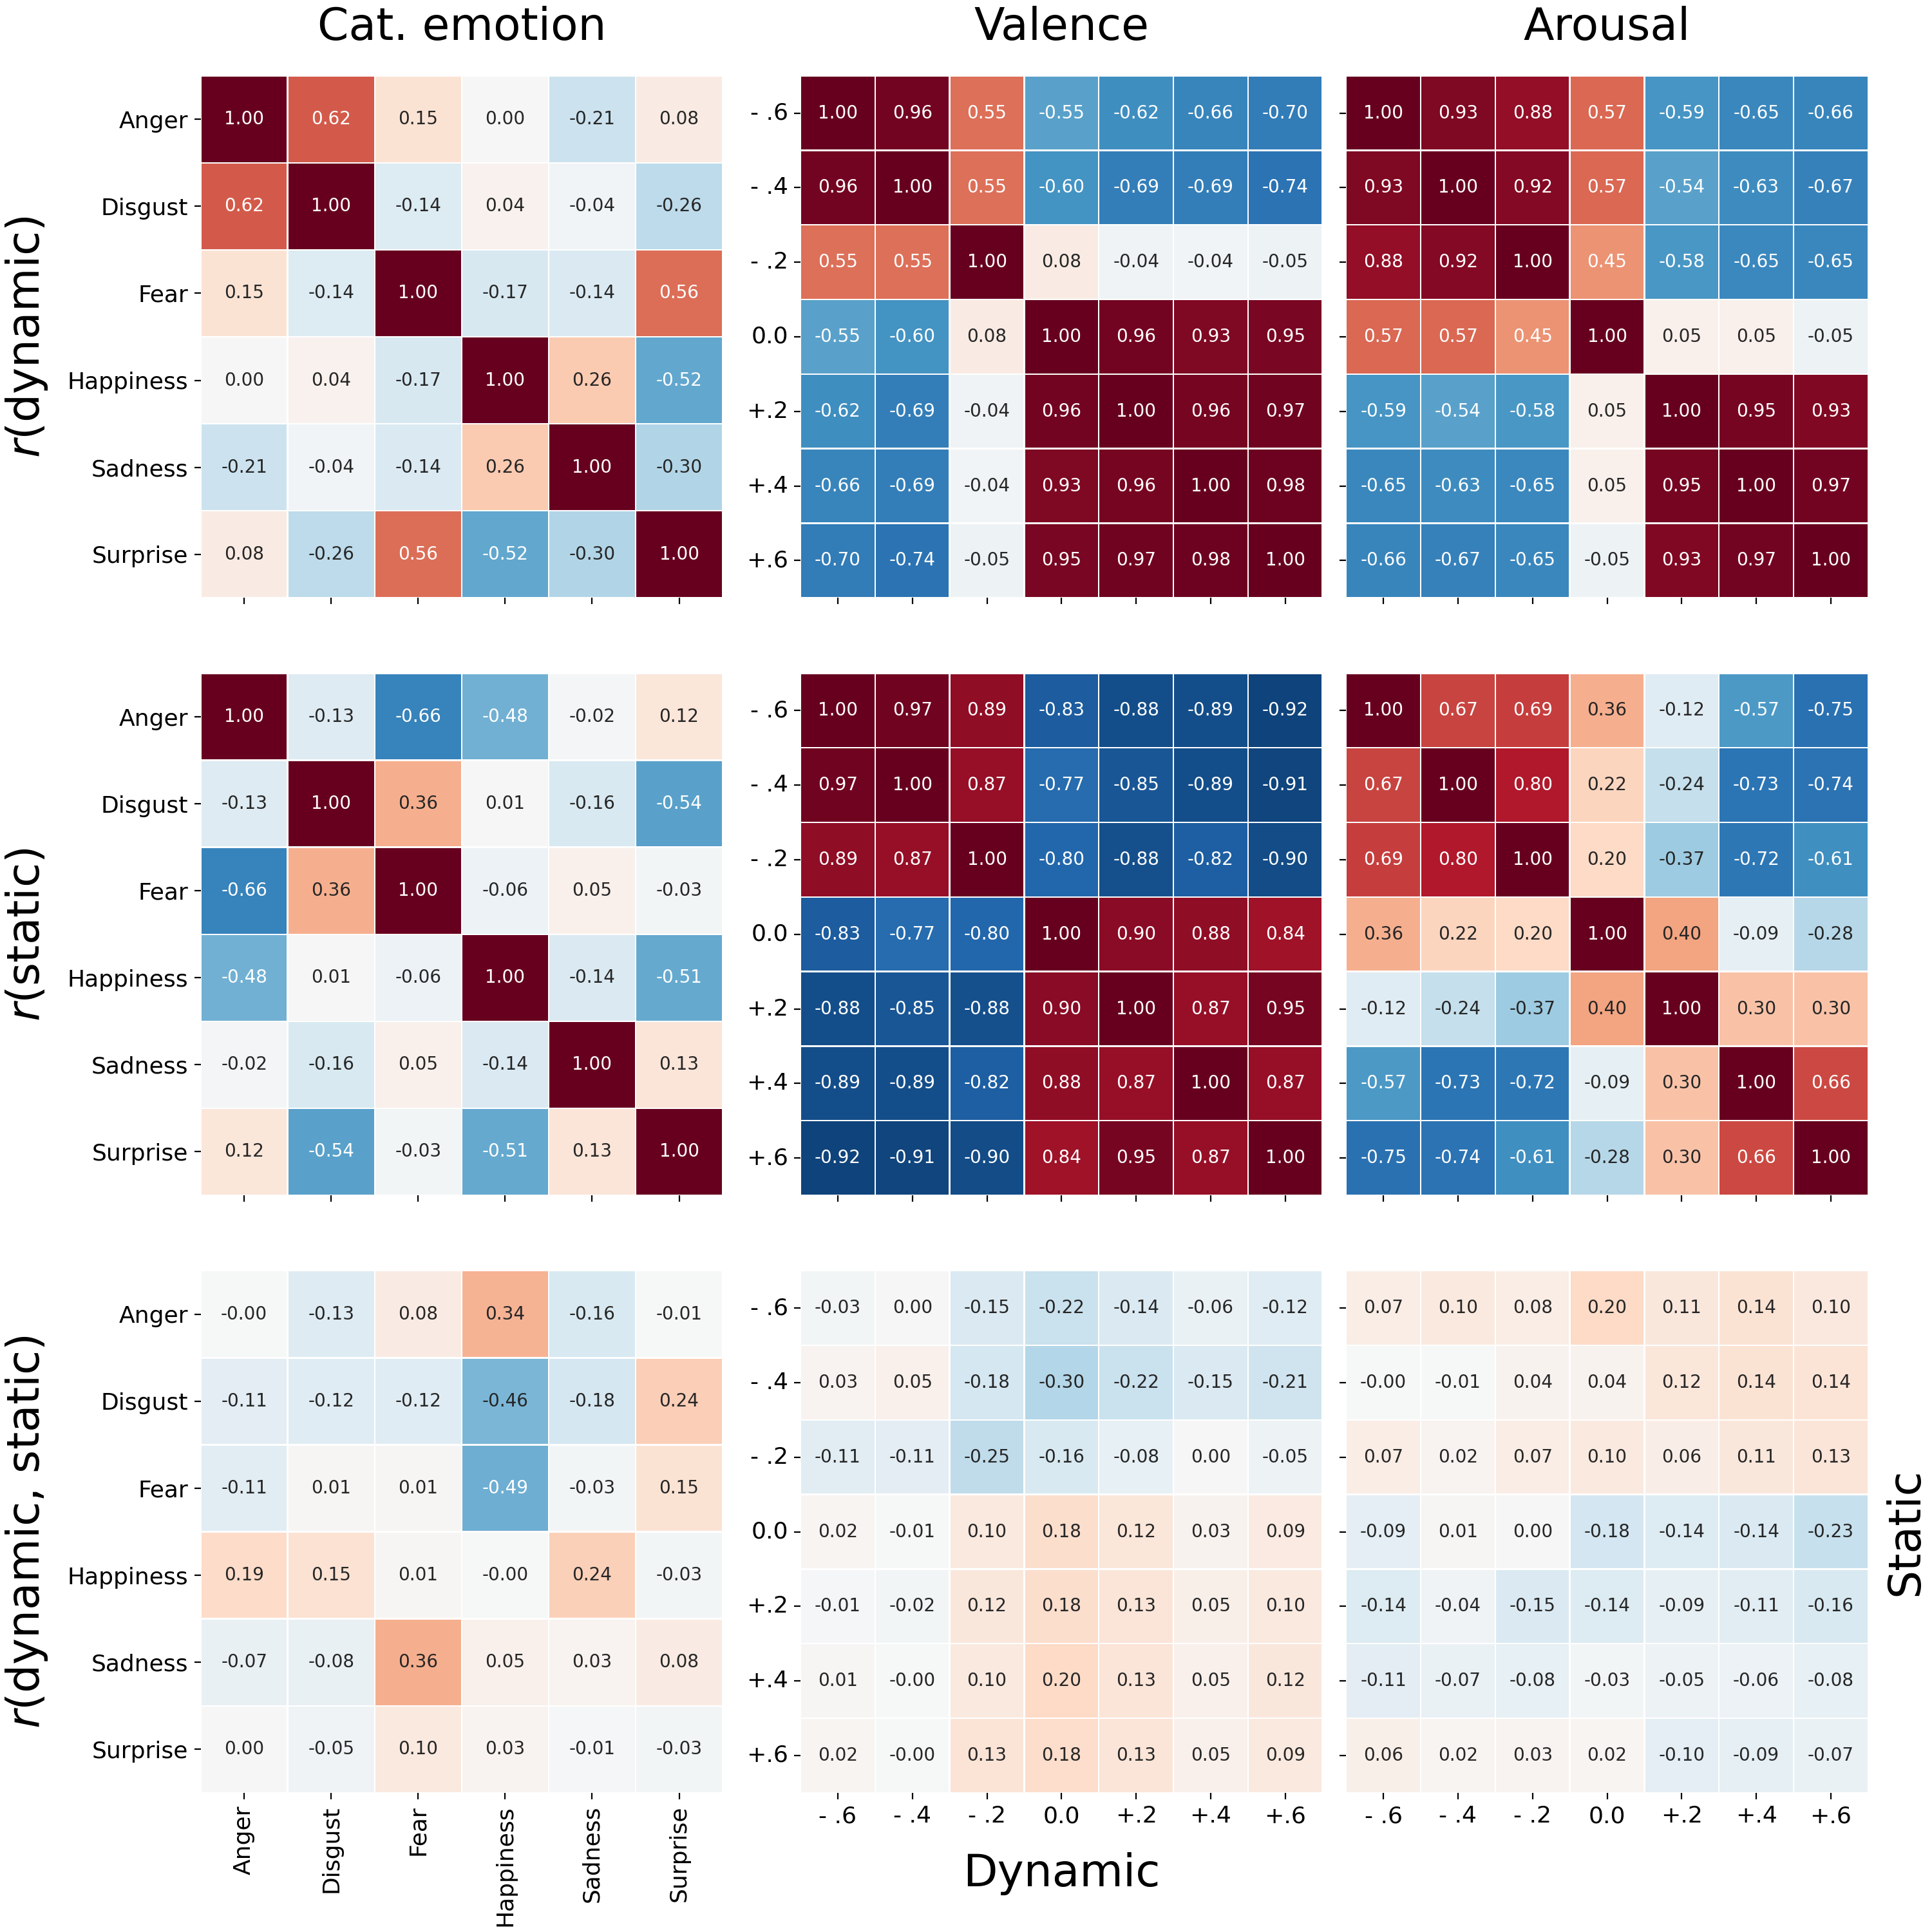 Correlations between reconstructions in vertex space for the categorical emotion (left), valence (middle), and arousal (right) models. The top row shows the correlations across all dynamic reconstructions. The middle row shows the correlations across all static reconstructions. The bottom row shows the correlations across each combination of a single dynamic and static reconstruction (e.g., in the bottom left correlation matrix, the top right cell represents the correlation between the static anger and the dynamic surprise reconstruction).